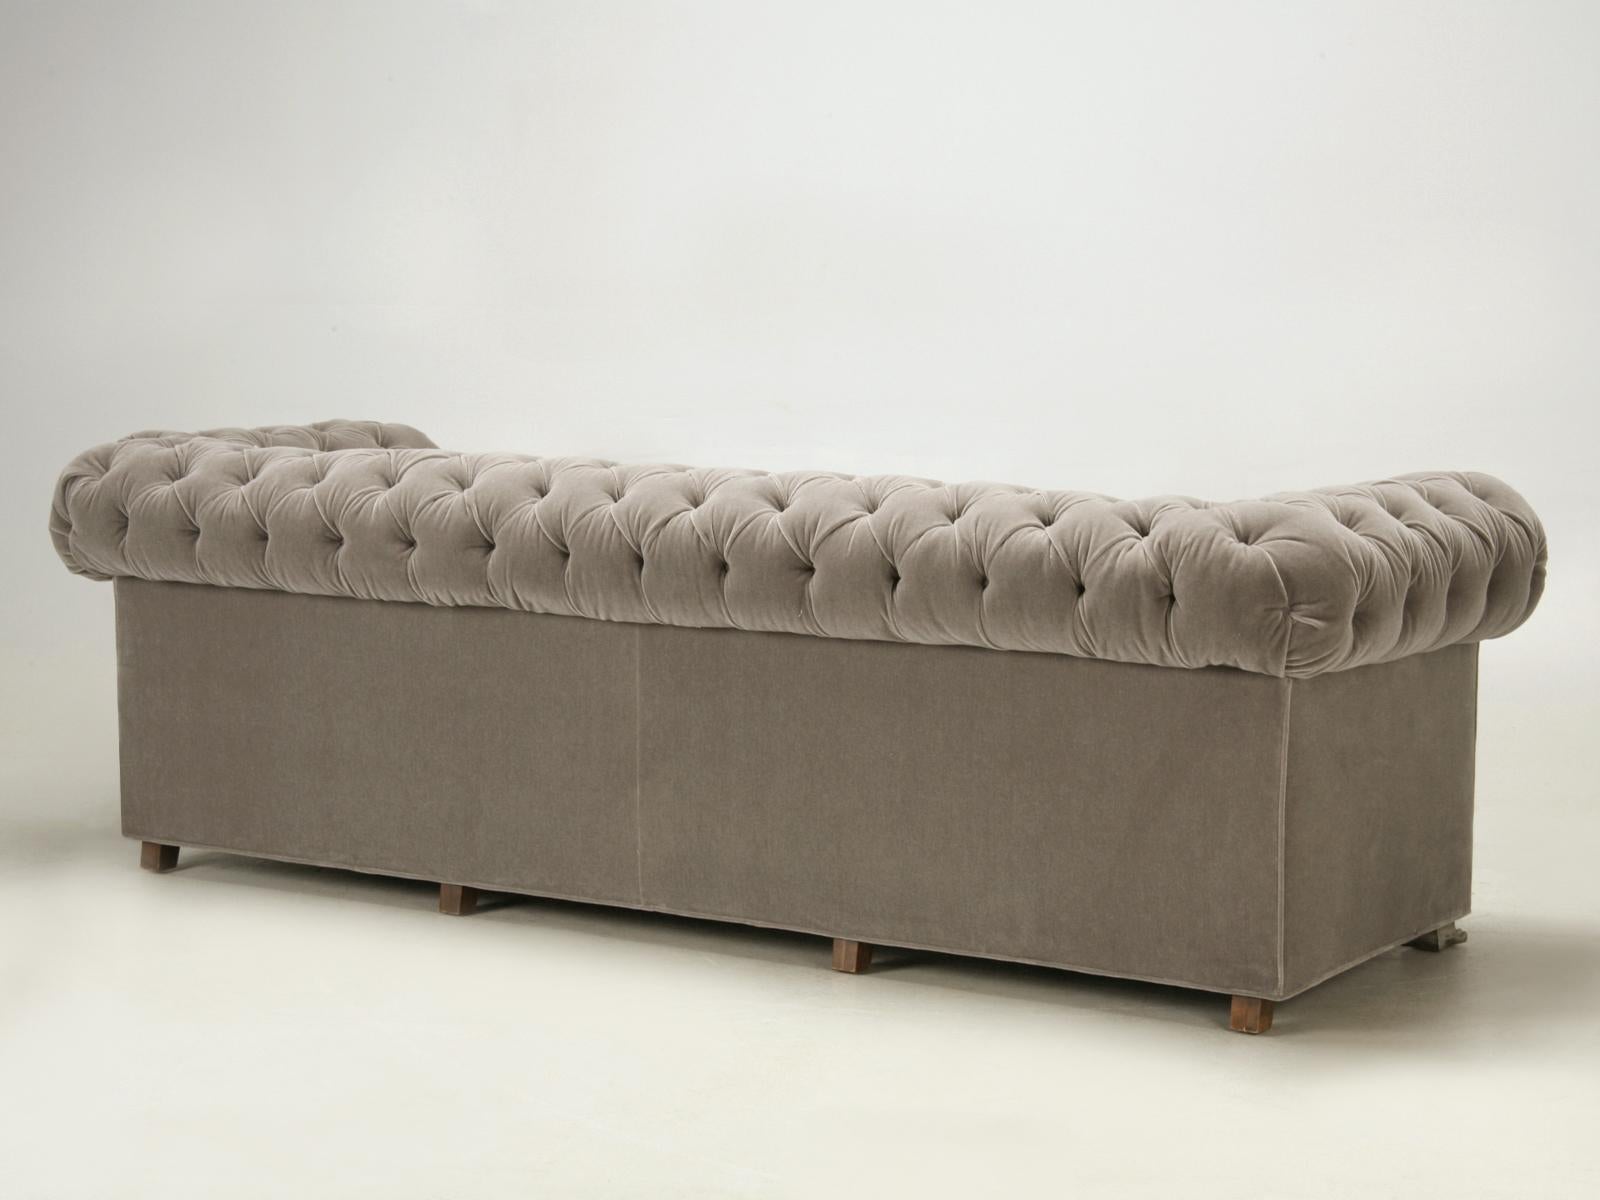 Custom Built Chesterfield Sofa in Mohair with Solid Bronze Nickel Plated Feet For Sale 4